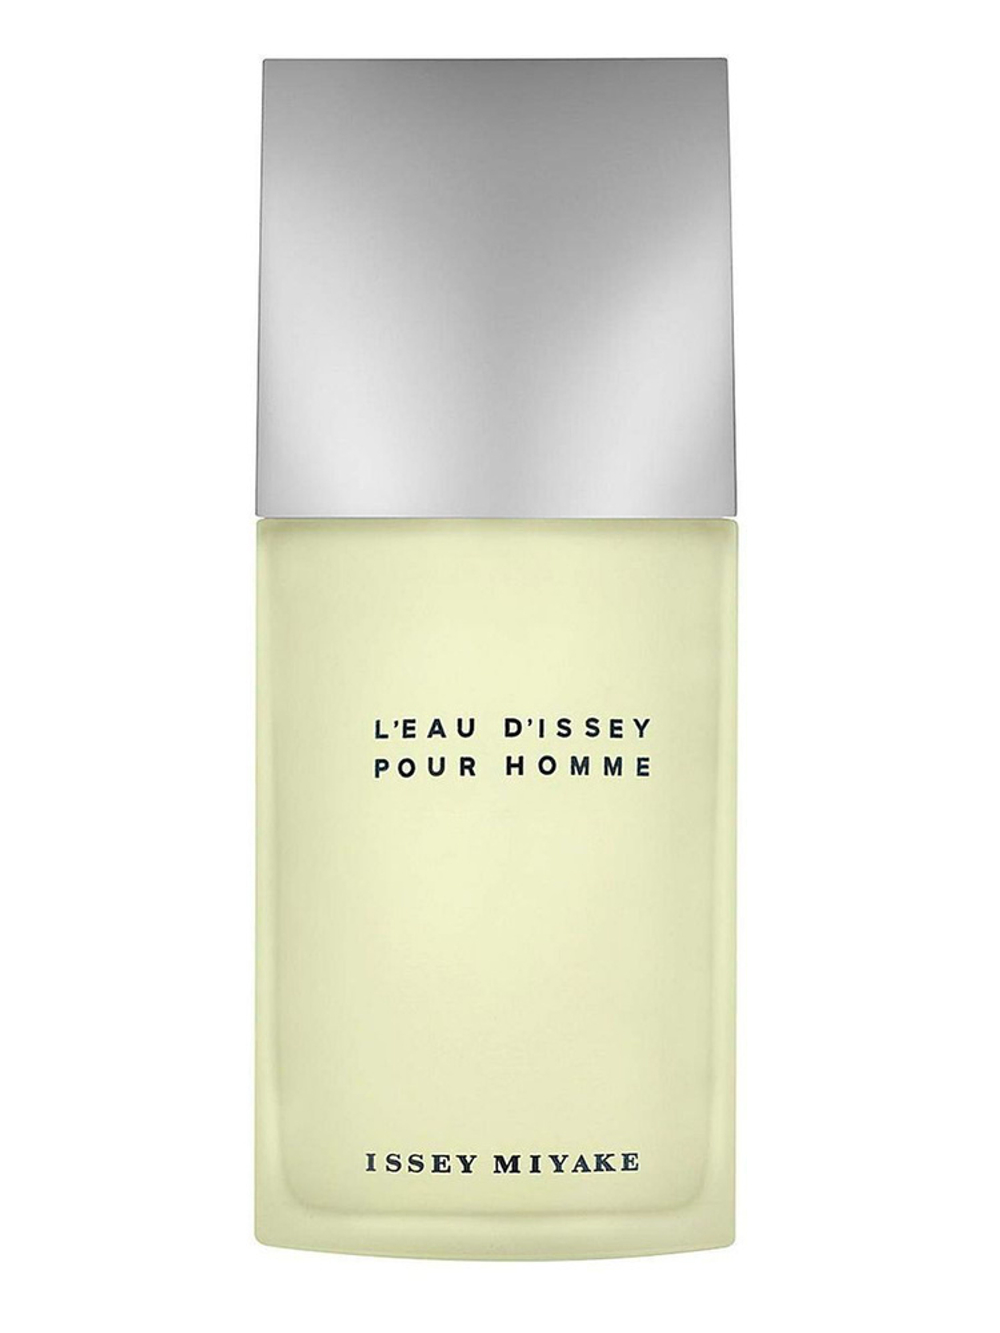 ISSEY MIYAKE L'eau D'issey Pour Homme